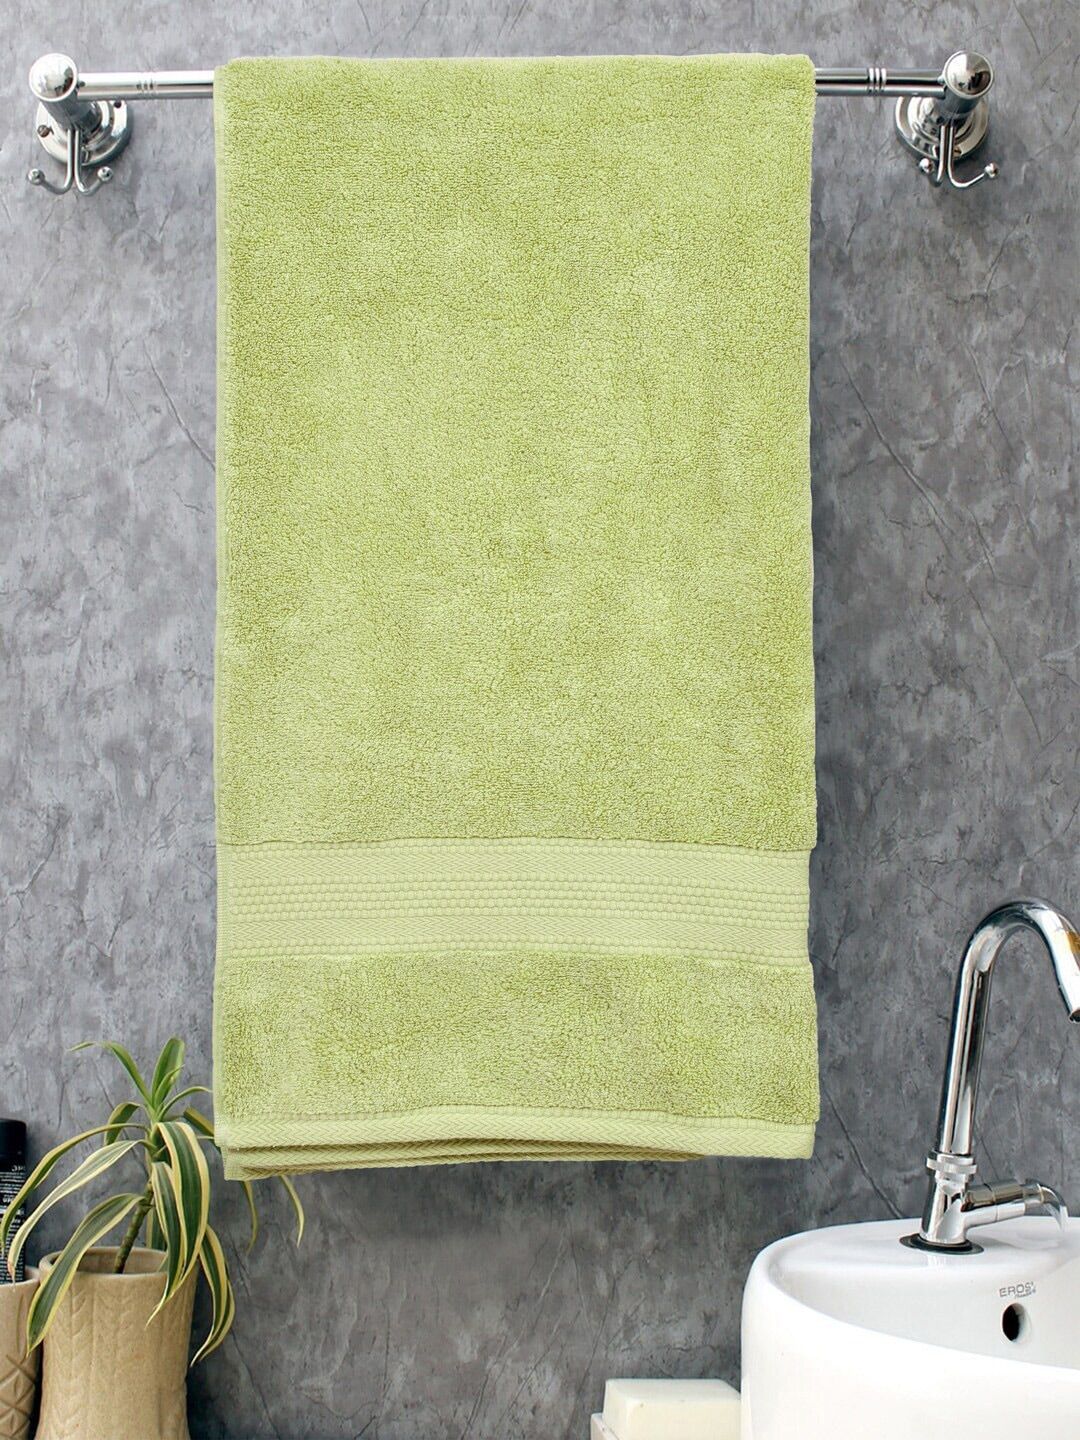 BOMBAY DYEING Lime Green Solid Cotton Bath Towel Price in India